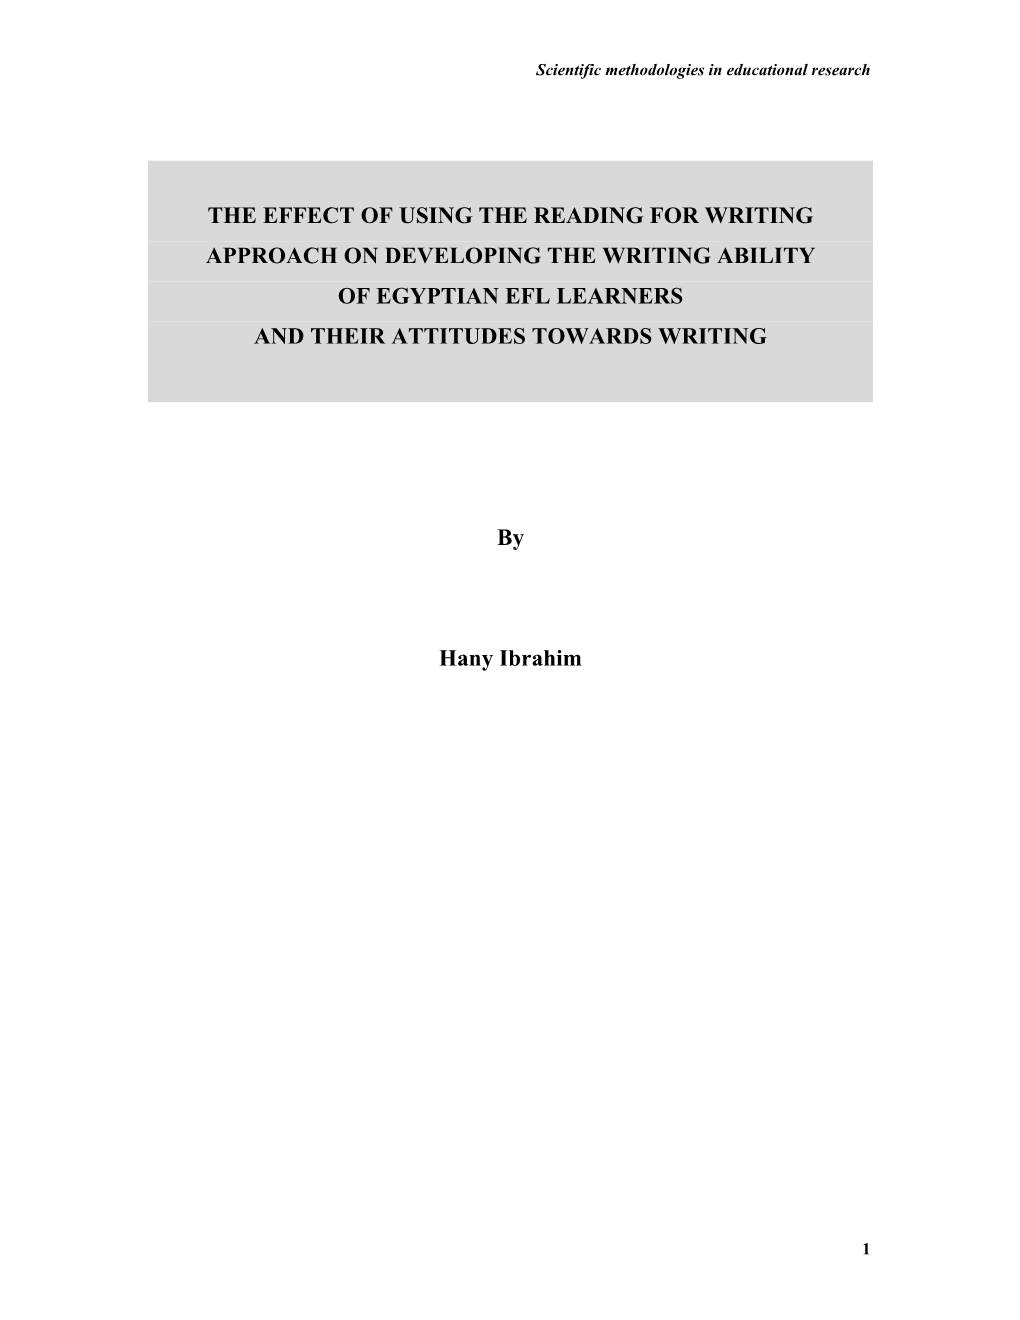 The Effect of Using the Reading for Writing Approach on Developing the Writing Ability of Egyptian Efl Learners and Their Attitudes Towards Writing